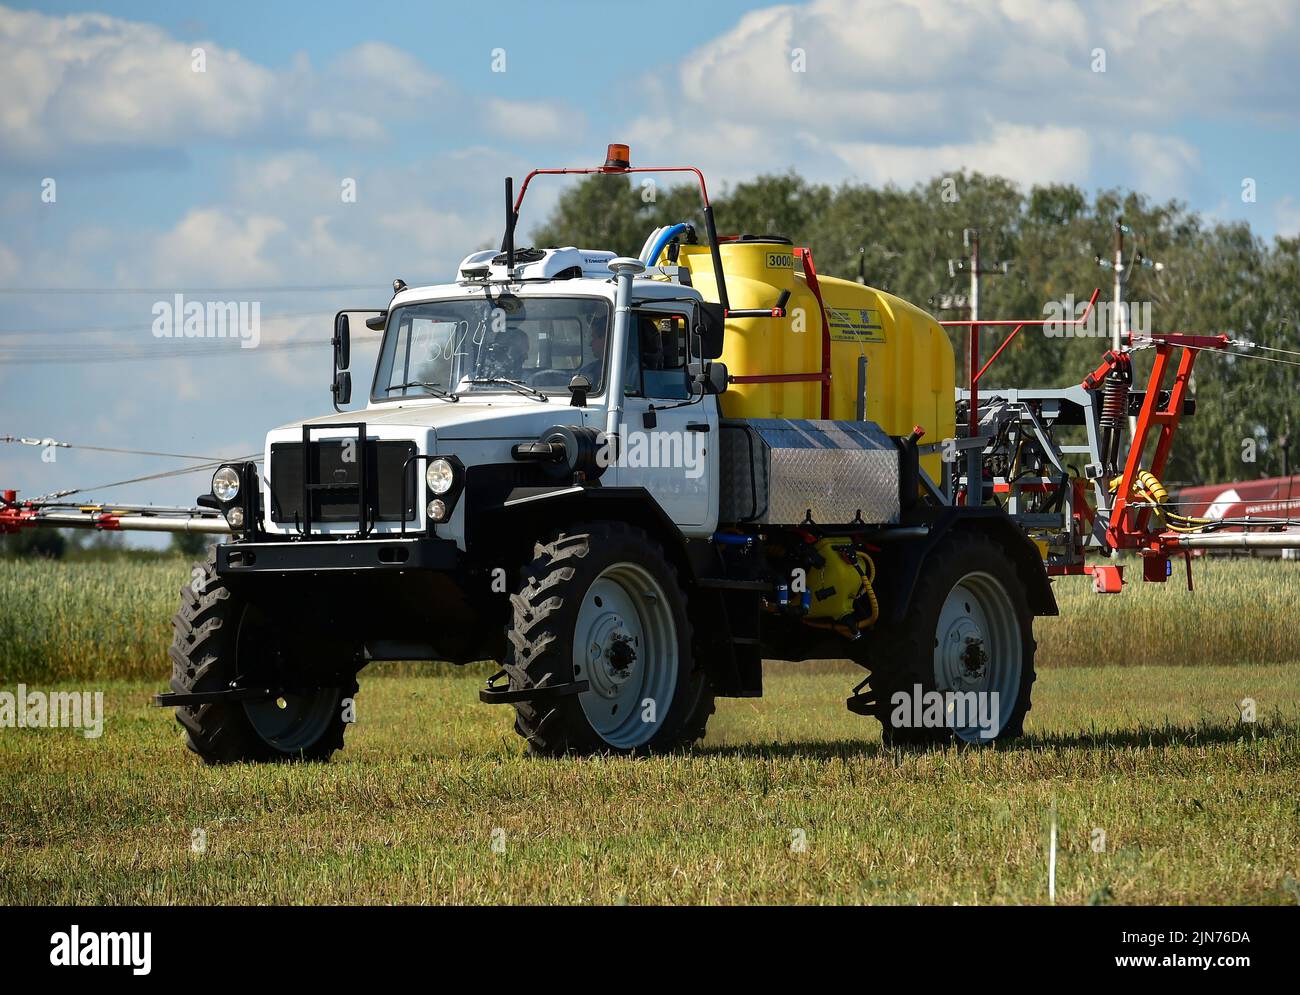 Regional demonstration site of modern technologies in agricultural production 'Field Day 2022' in Novosibirsk. Genre photography. Vehicle for crop pest control. 05.08.2022 Russia, Novosibirsk Photo credit: Vlad Nekrasov/Kommersant/Sipa USA Stock Photo